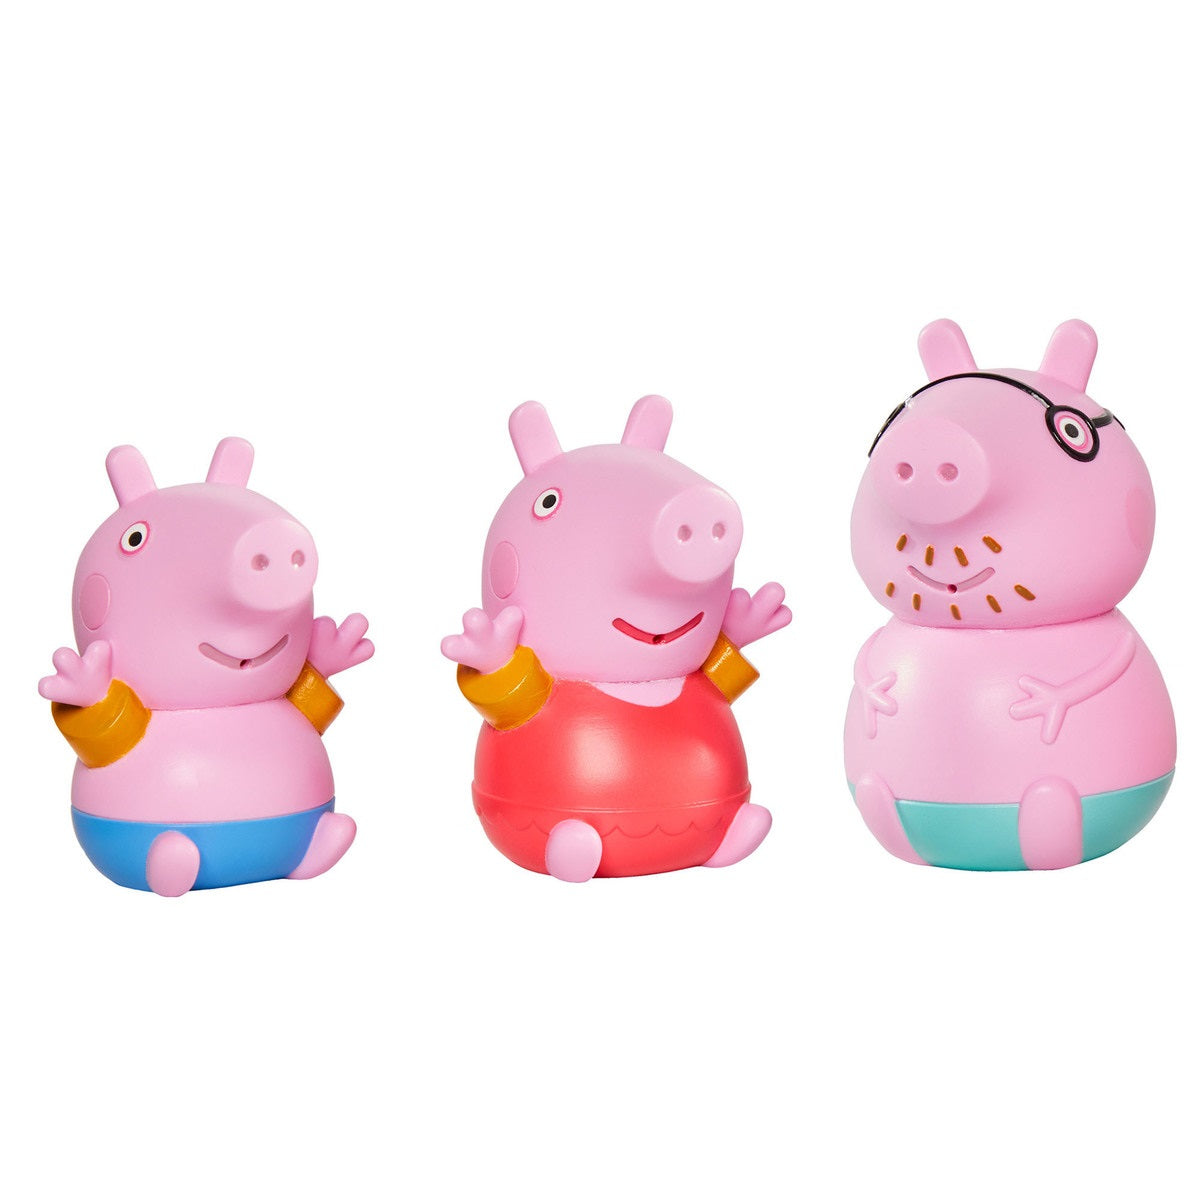 Peppa Pig Bath Floats Squirters (Styles Vary)